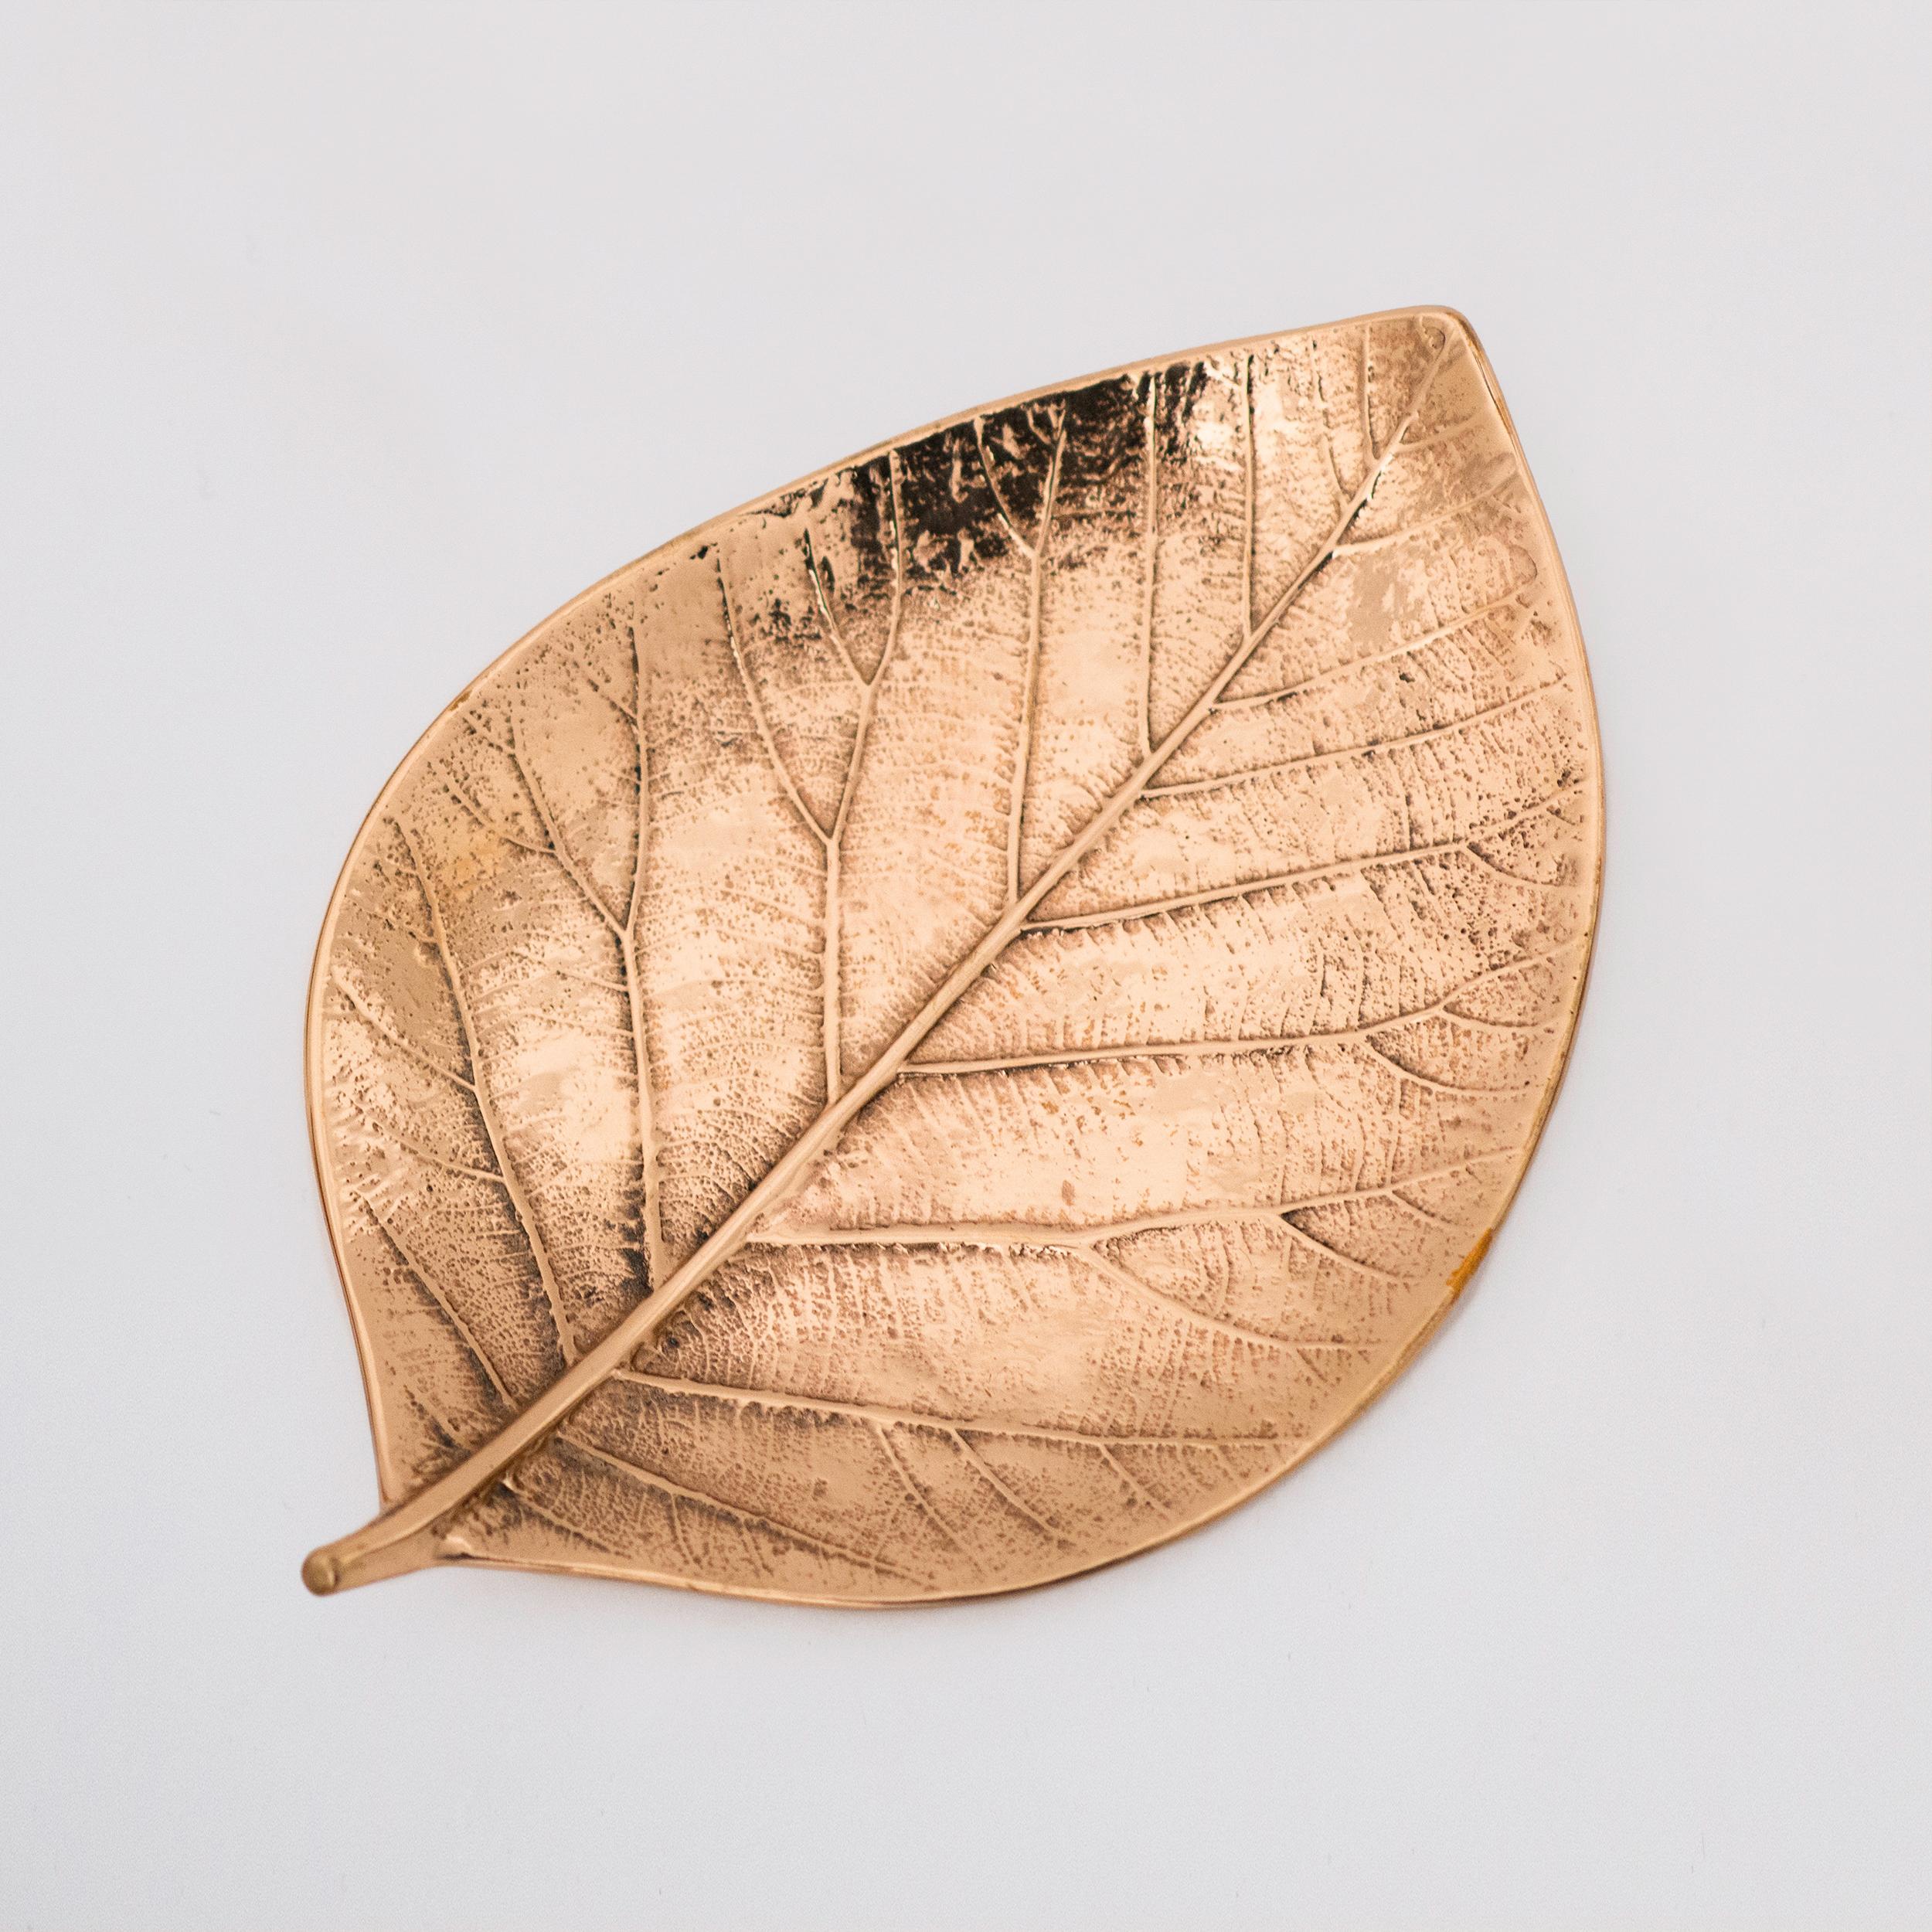 Each of these splendid bronze leaves is handmade individually with incredible detail. Cast using very traditional techniques, they are polished capturing the raw finish of this noble material and impressively highlighting every vein and